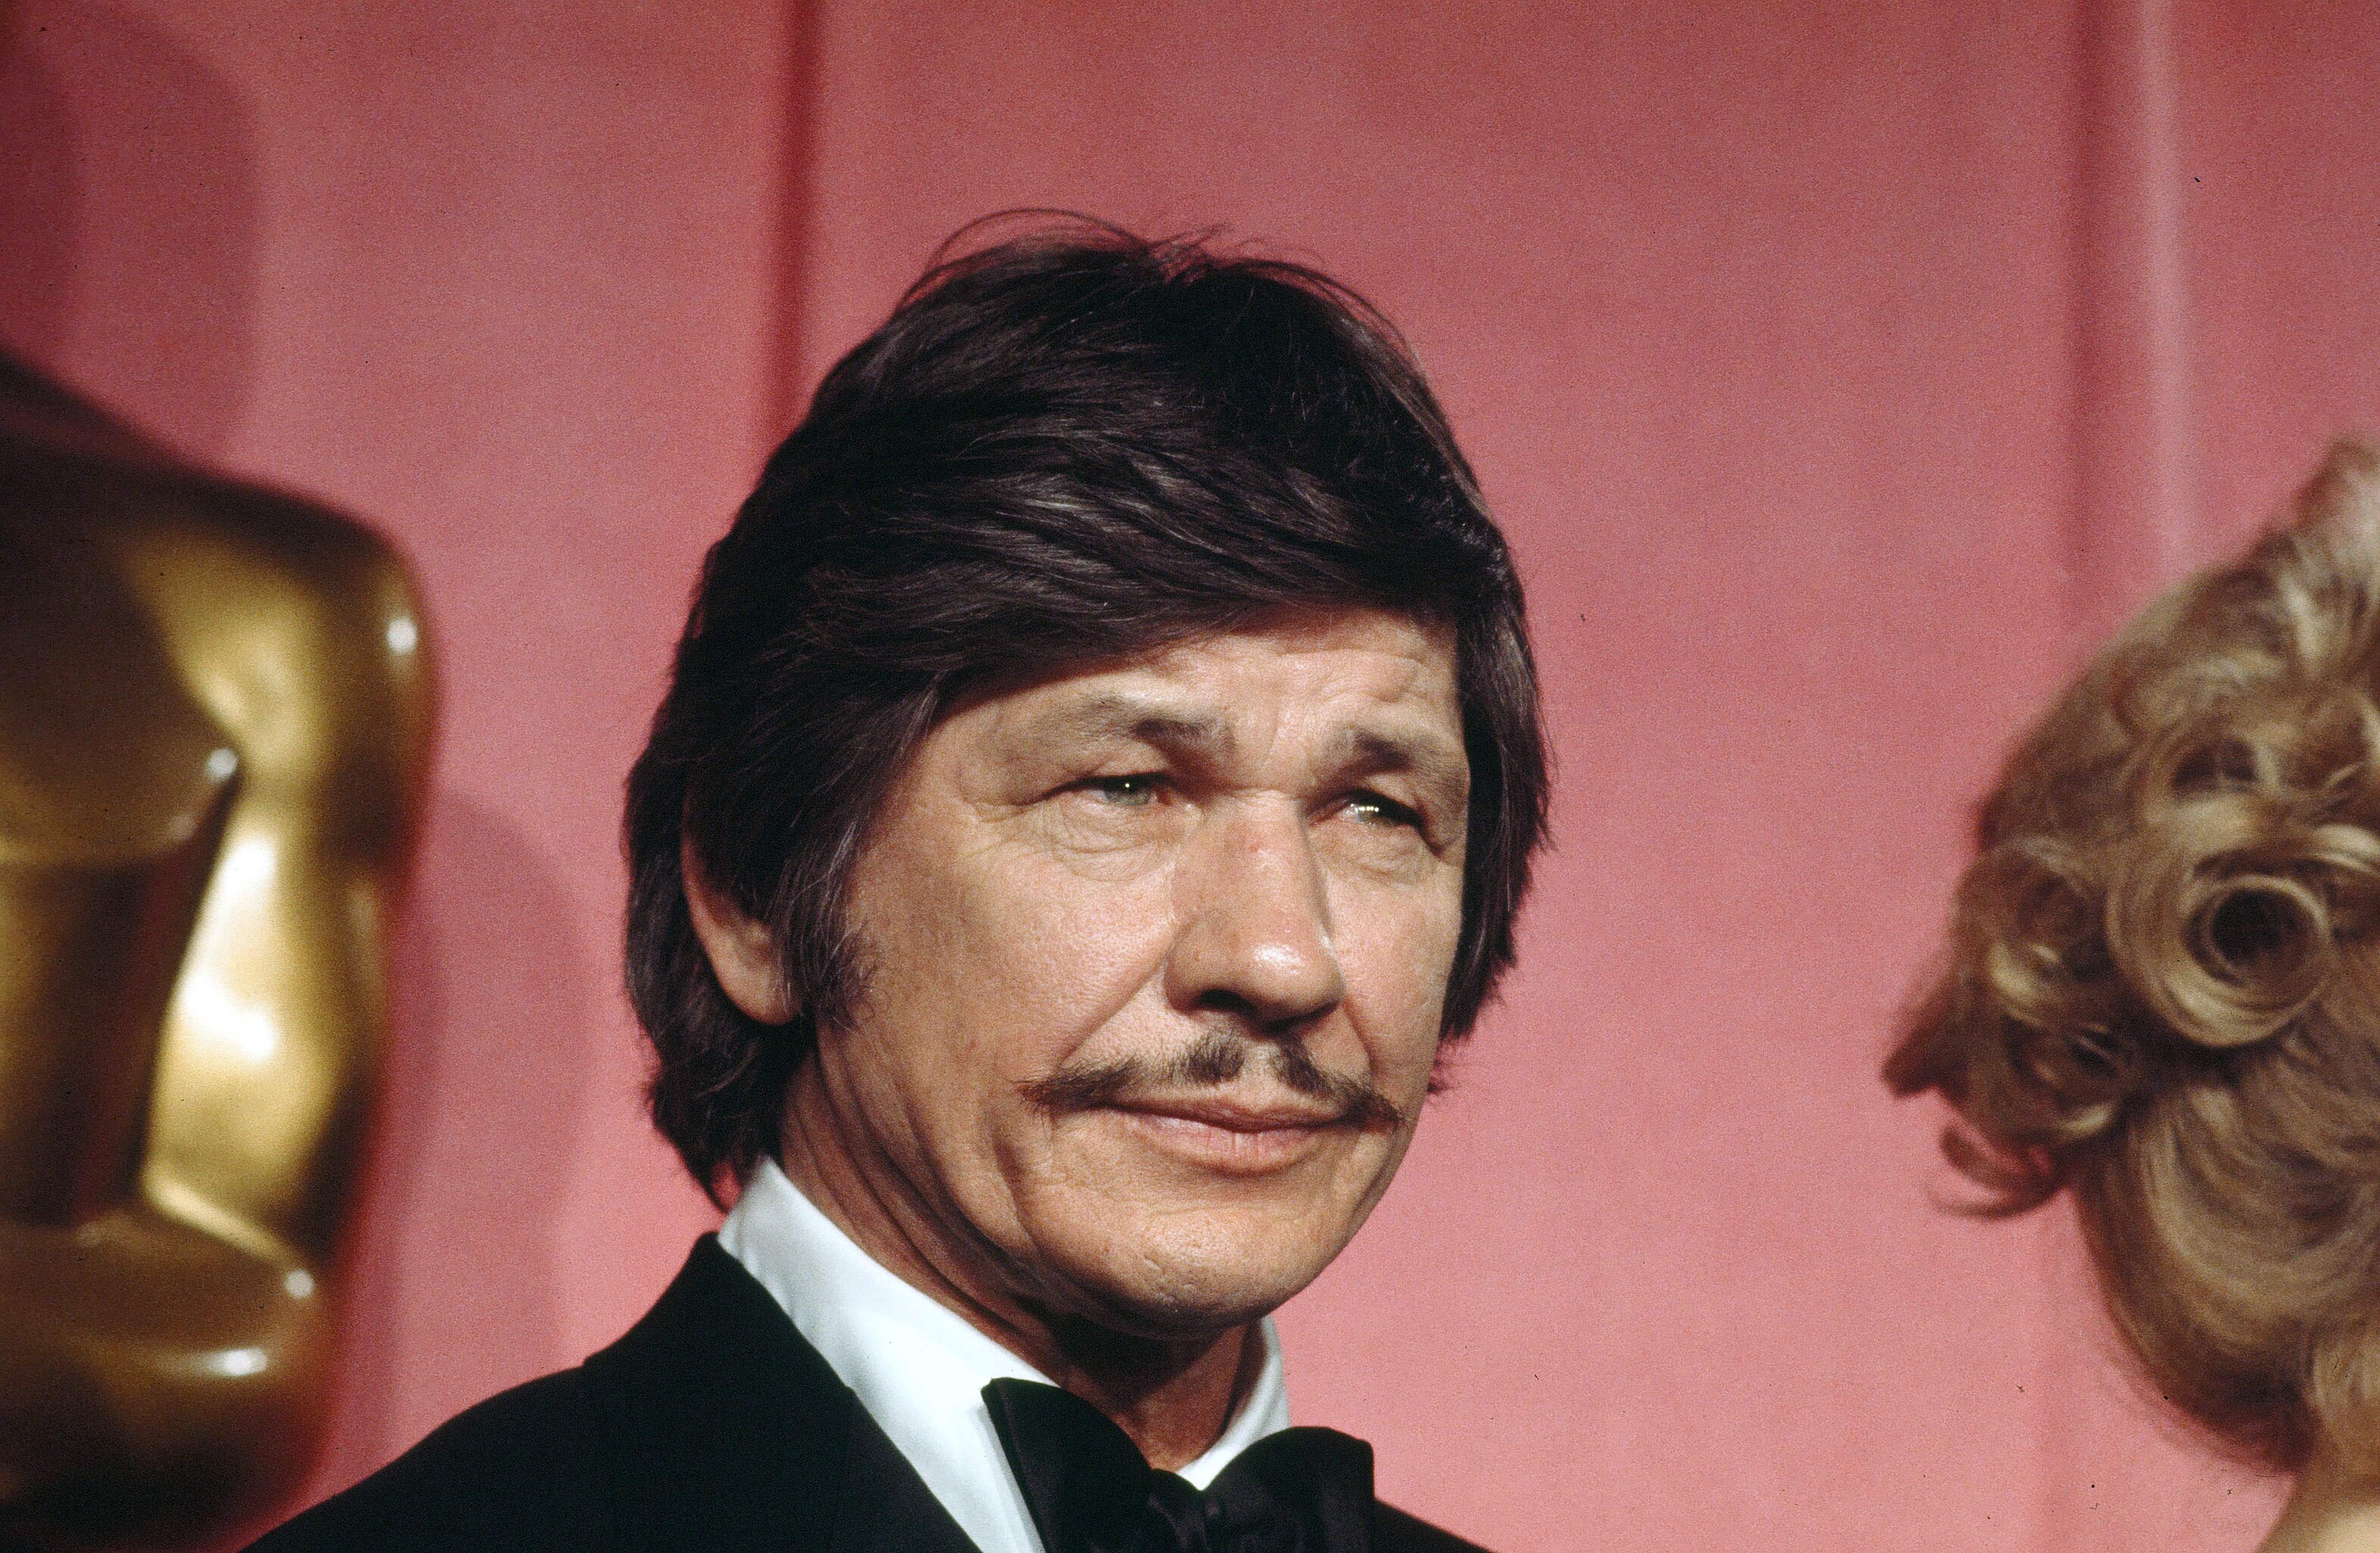 Charles Bronson posing backstage during the 46th Academy Awards at Dorothy Chandler Pavilion in Los Angeles, California. / Source: Getty Images